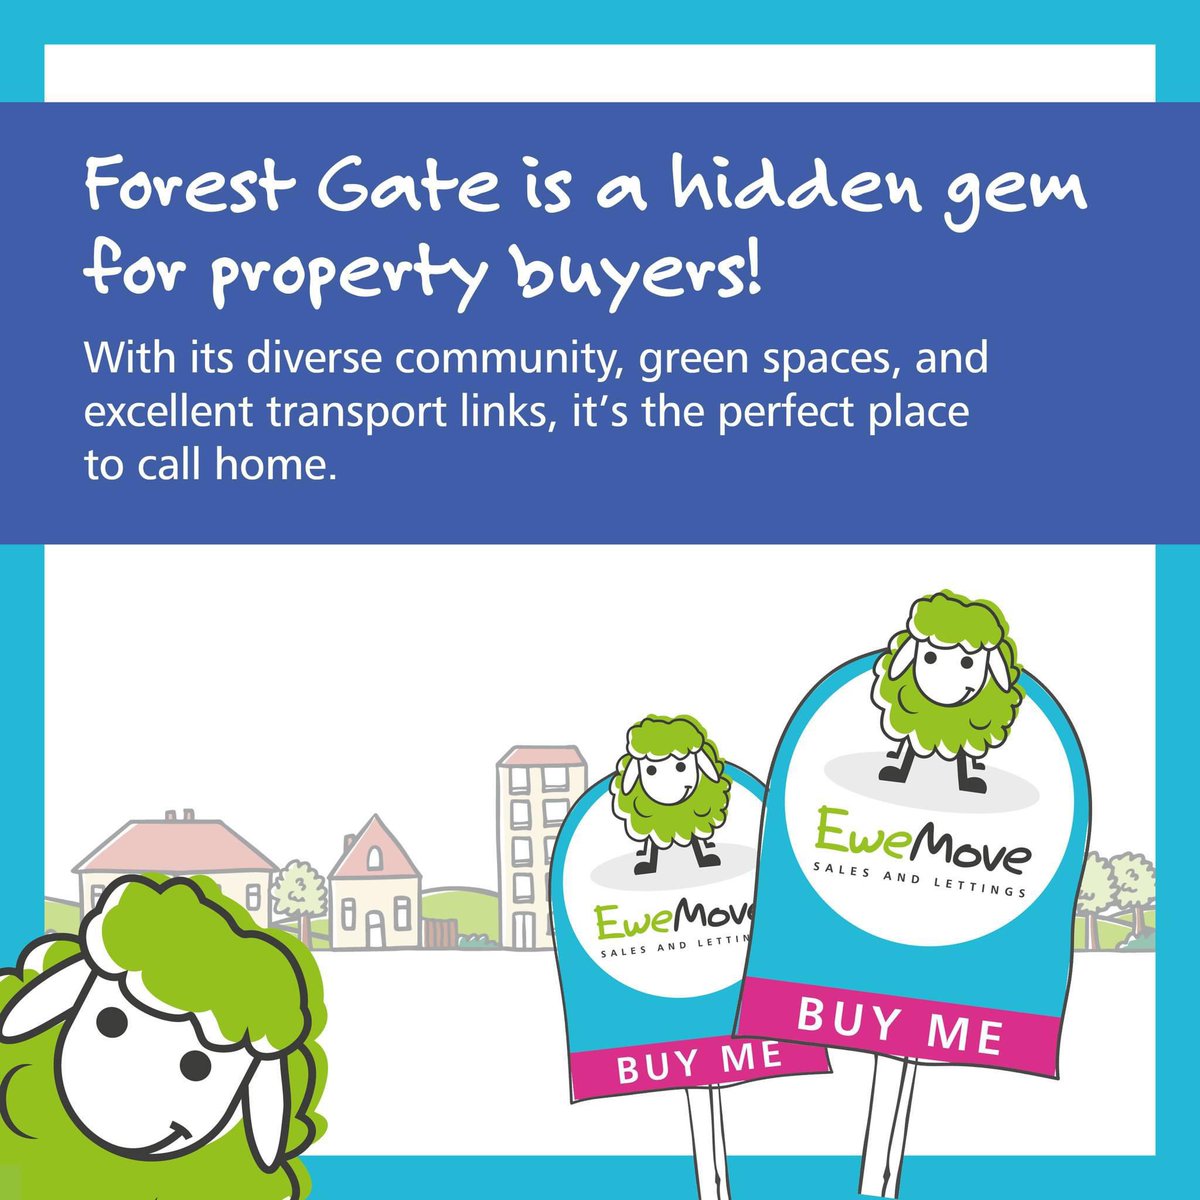 Forest Gate is a hidden gem for property buyers! With its diverse community, green spaces, and excellent transport links, it's the perfect place to call home. Let us help you find your slice of paradise in Forest Gate! 🏡🌳

#EweMove #Stratford #ForestGate  #LocalEstateAgent